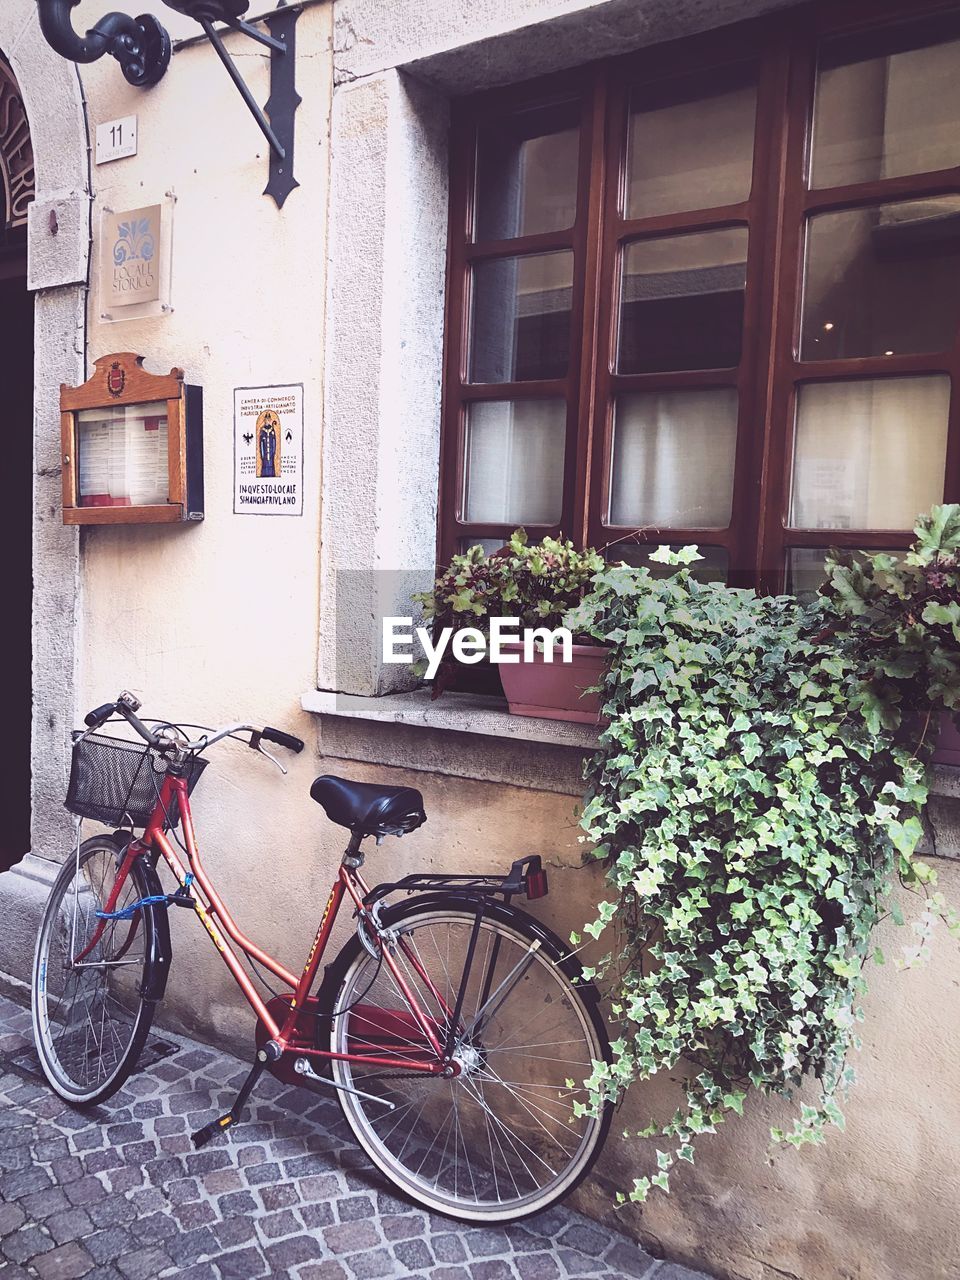 Bicycle by potted plants outside building